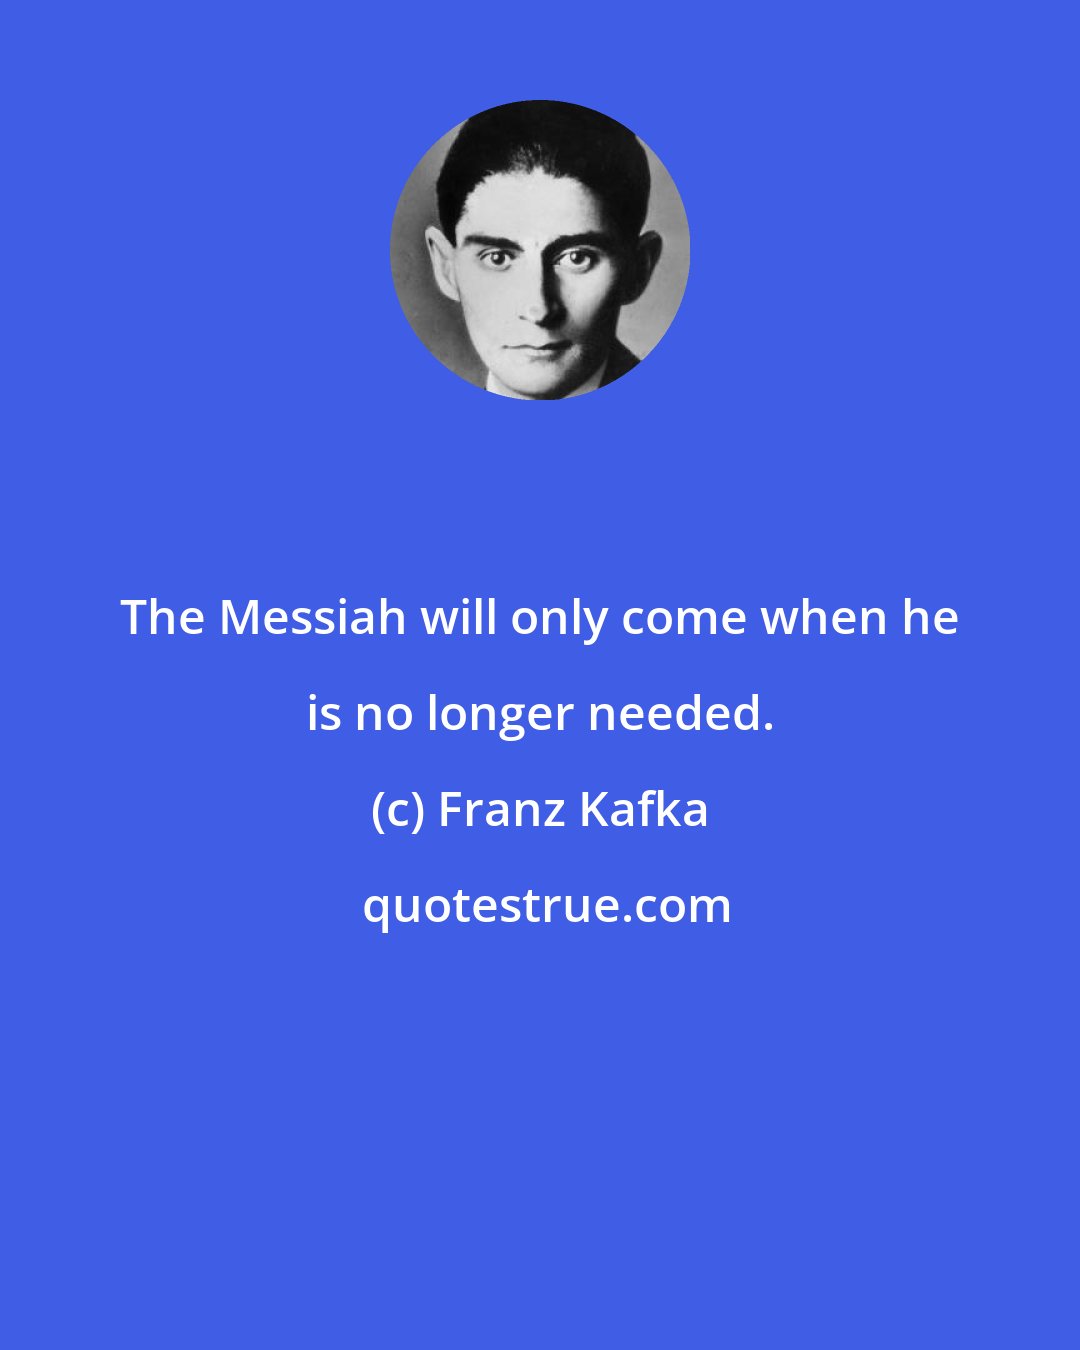 Franz Kafka: The Messiah will only come when he is no longer needed.